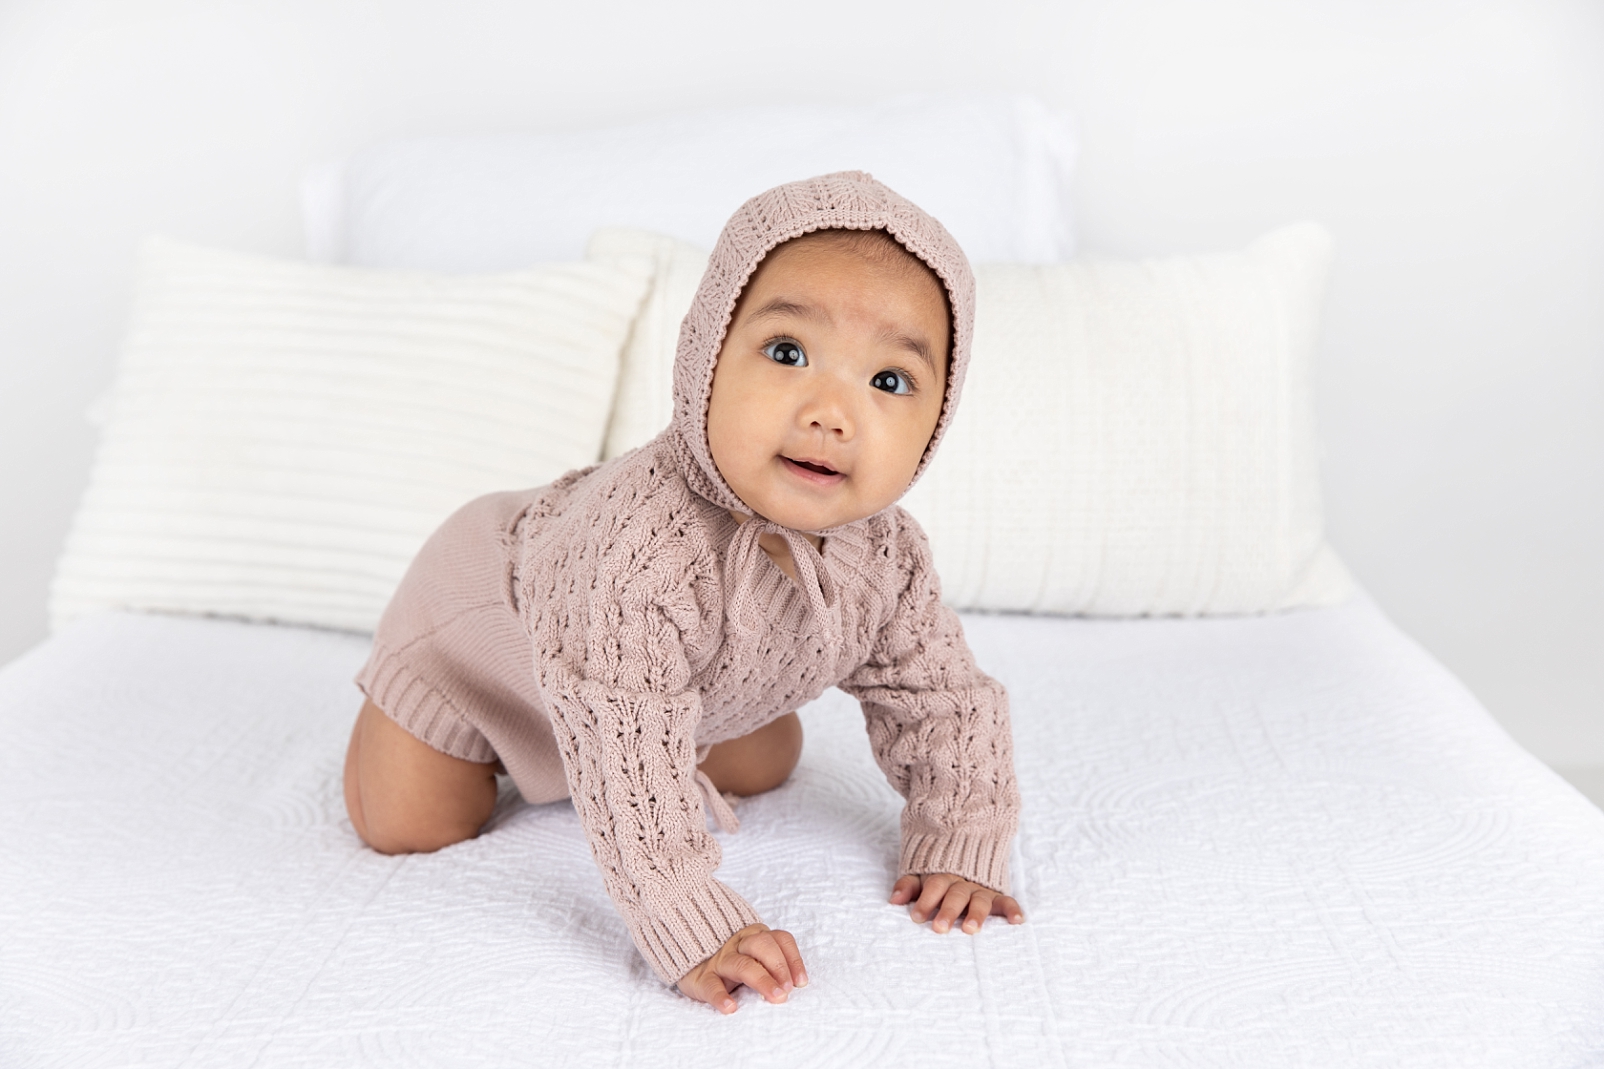 Baby girl in knit mauve outfit and bonnet smiling and crawling on white fabric as part of a First Year Membership | Maryland Baby Photographer